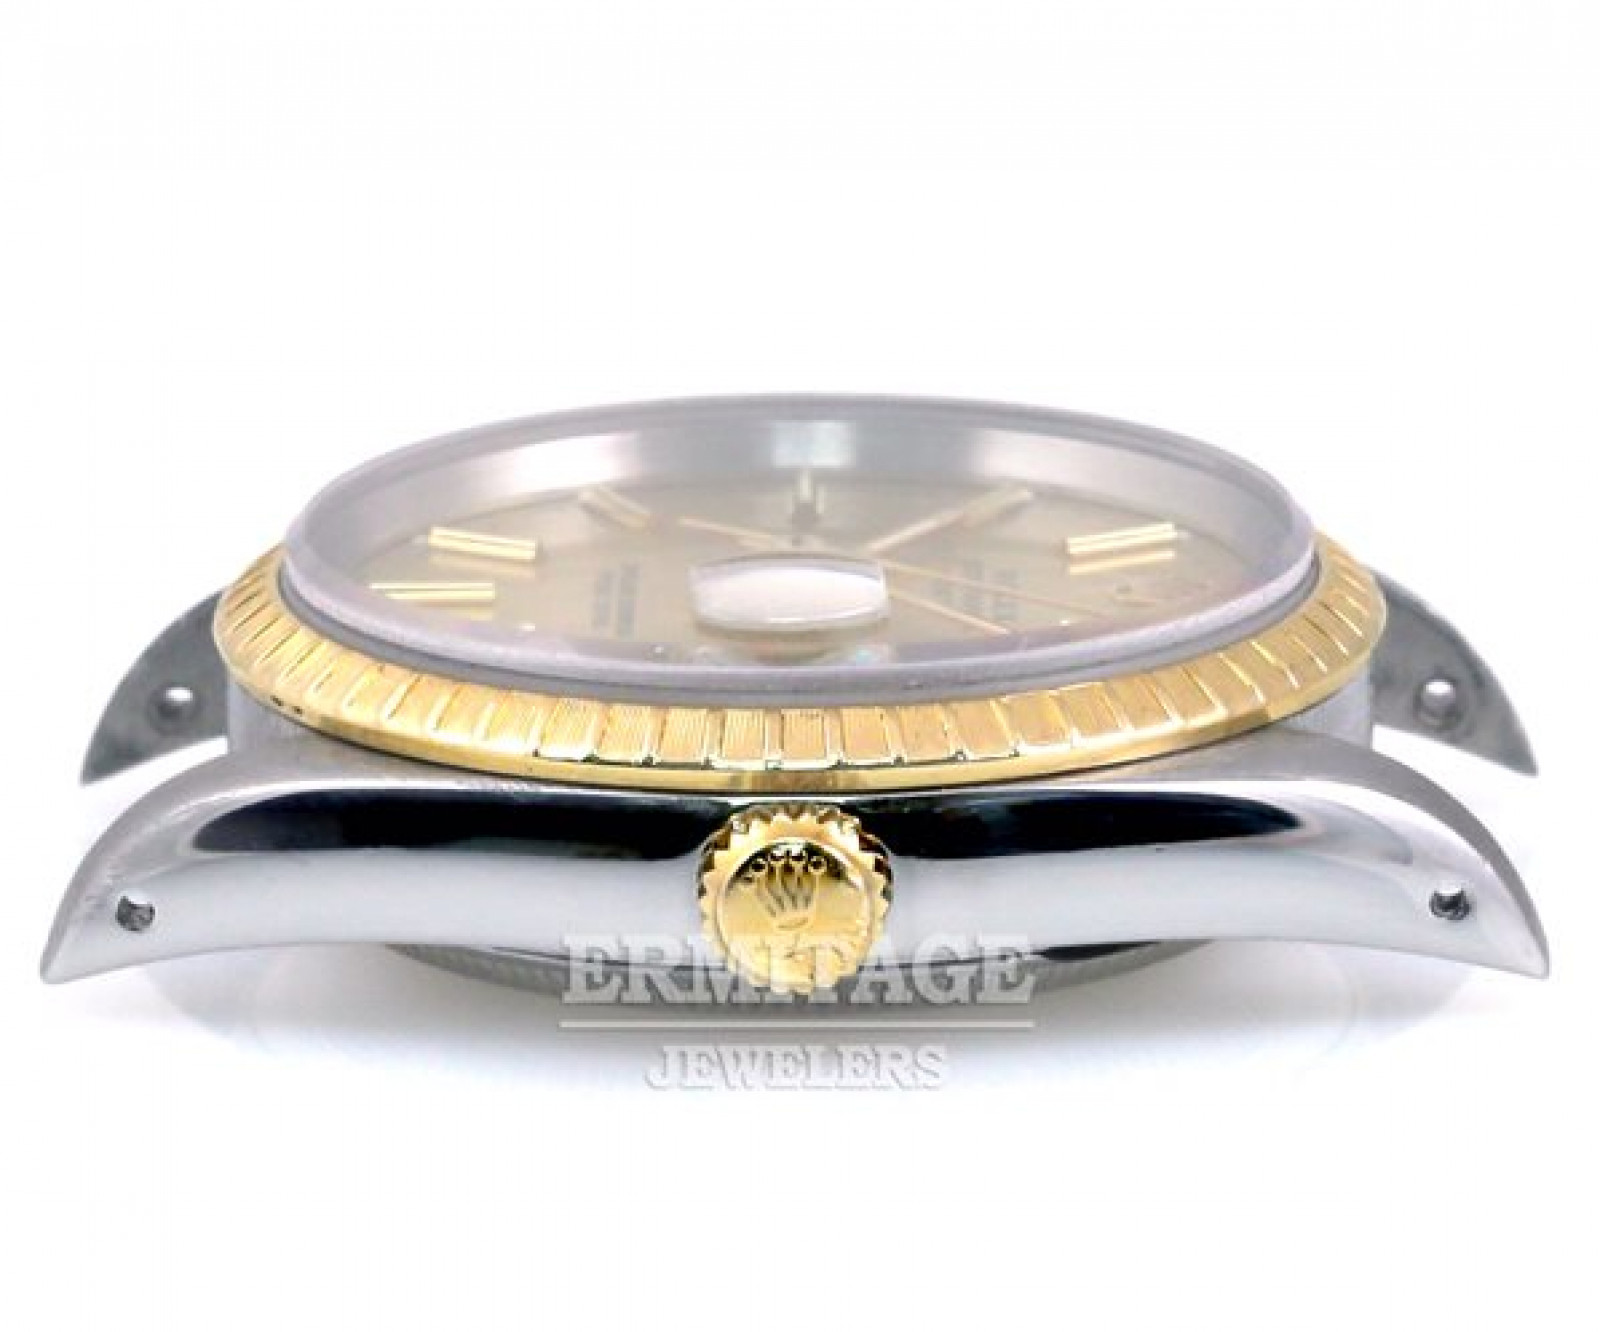 Pre-Owned Rolex Oyster Perpetual Date 15223 Gold & Steel